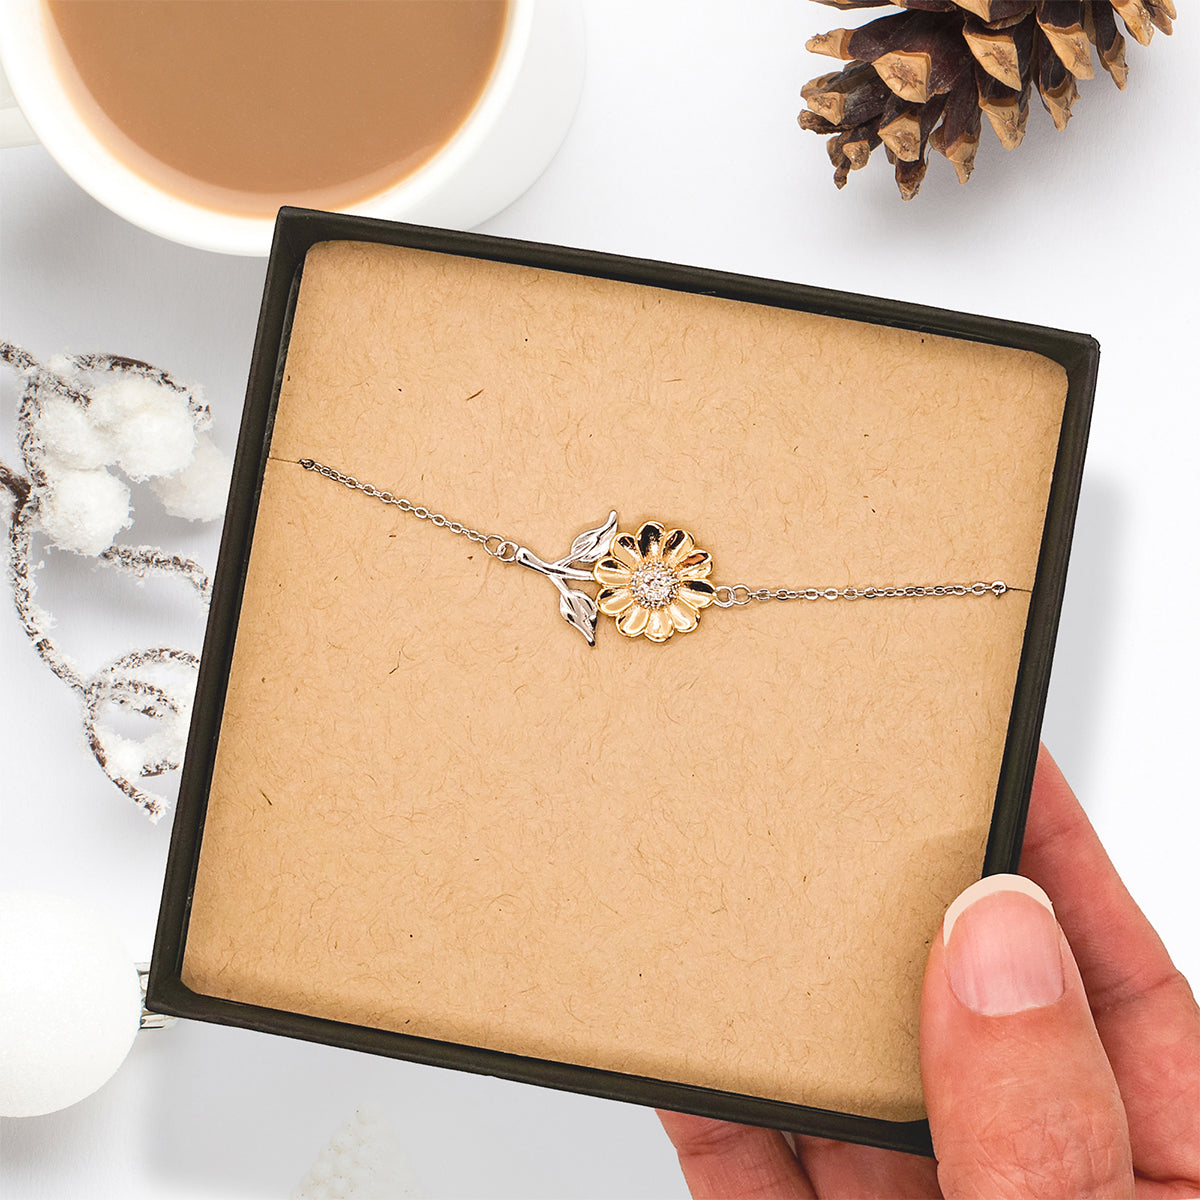 Special Mamma Sunflower Bracelet - Engraved Gift for Her Birthday, Mothers Day, Christmas - You will have a place in my heart always, Mamma - Inspirational Jewelry for Confidence and Hope